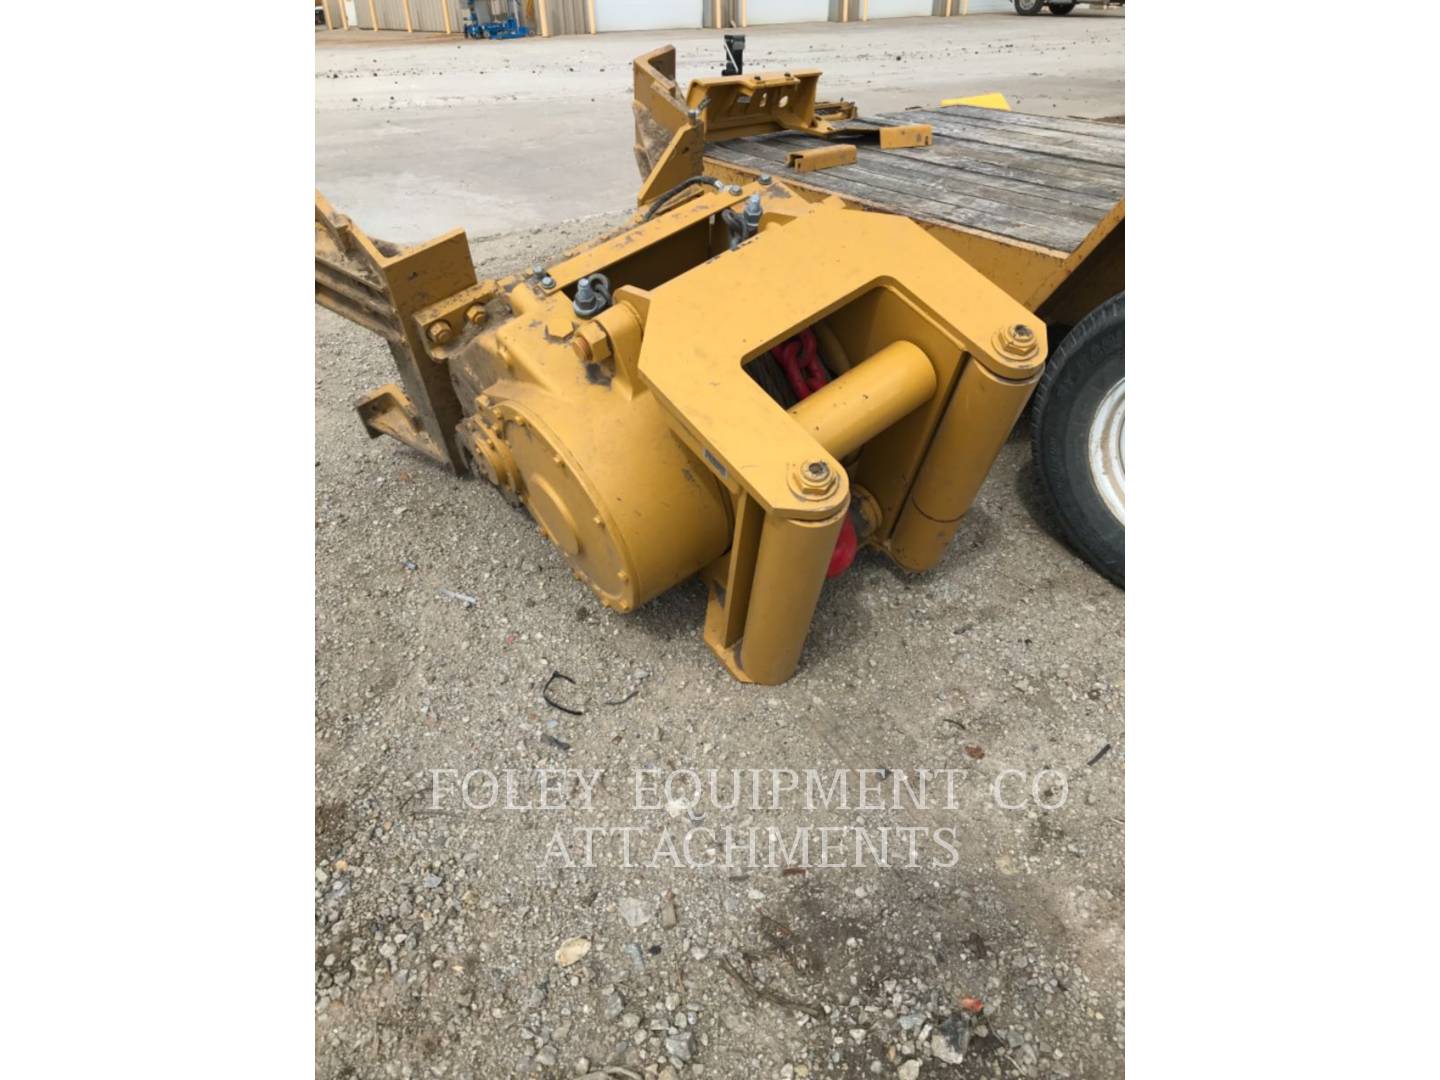 Used Cat Heavy Construction Equipment Attachments for Sale - Foley 